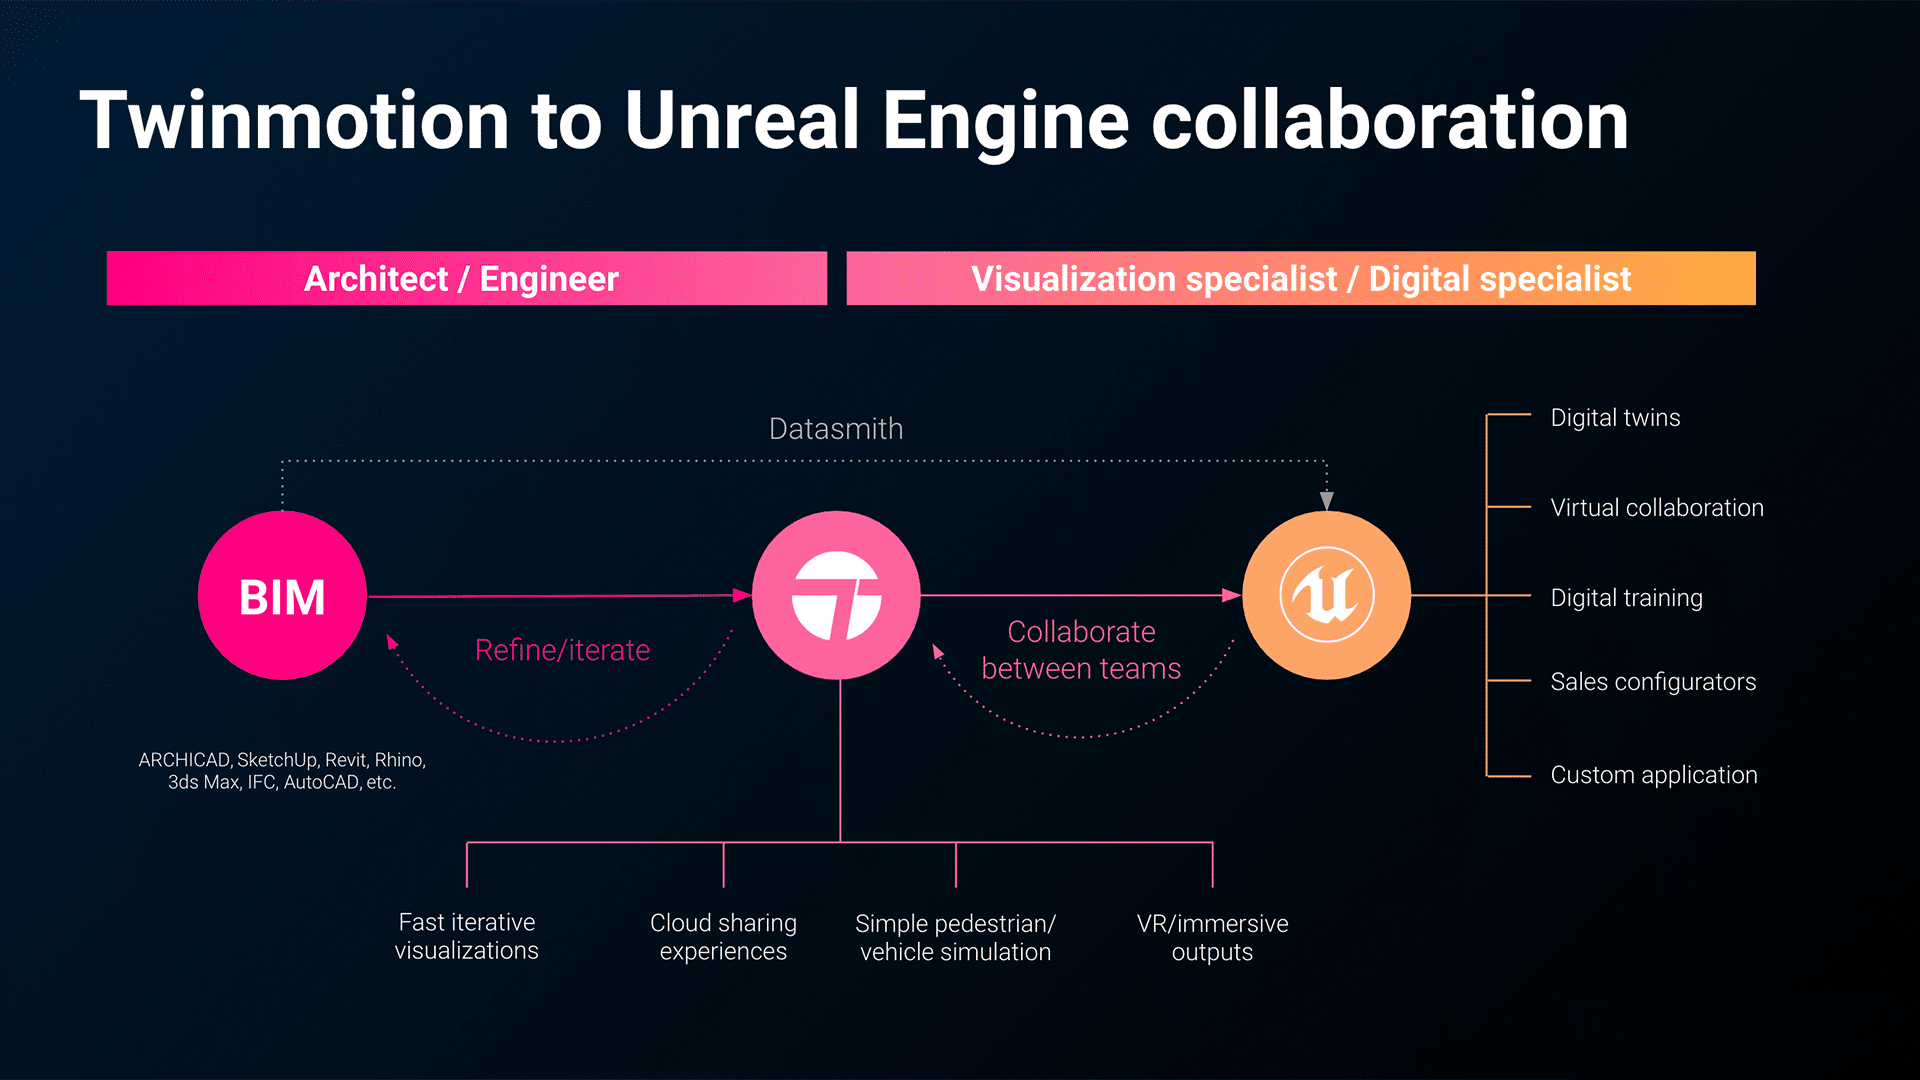 difference between unreal engine and twinmotion